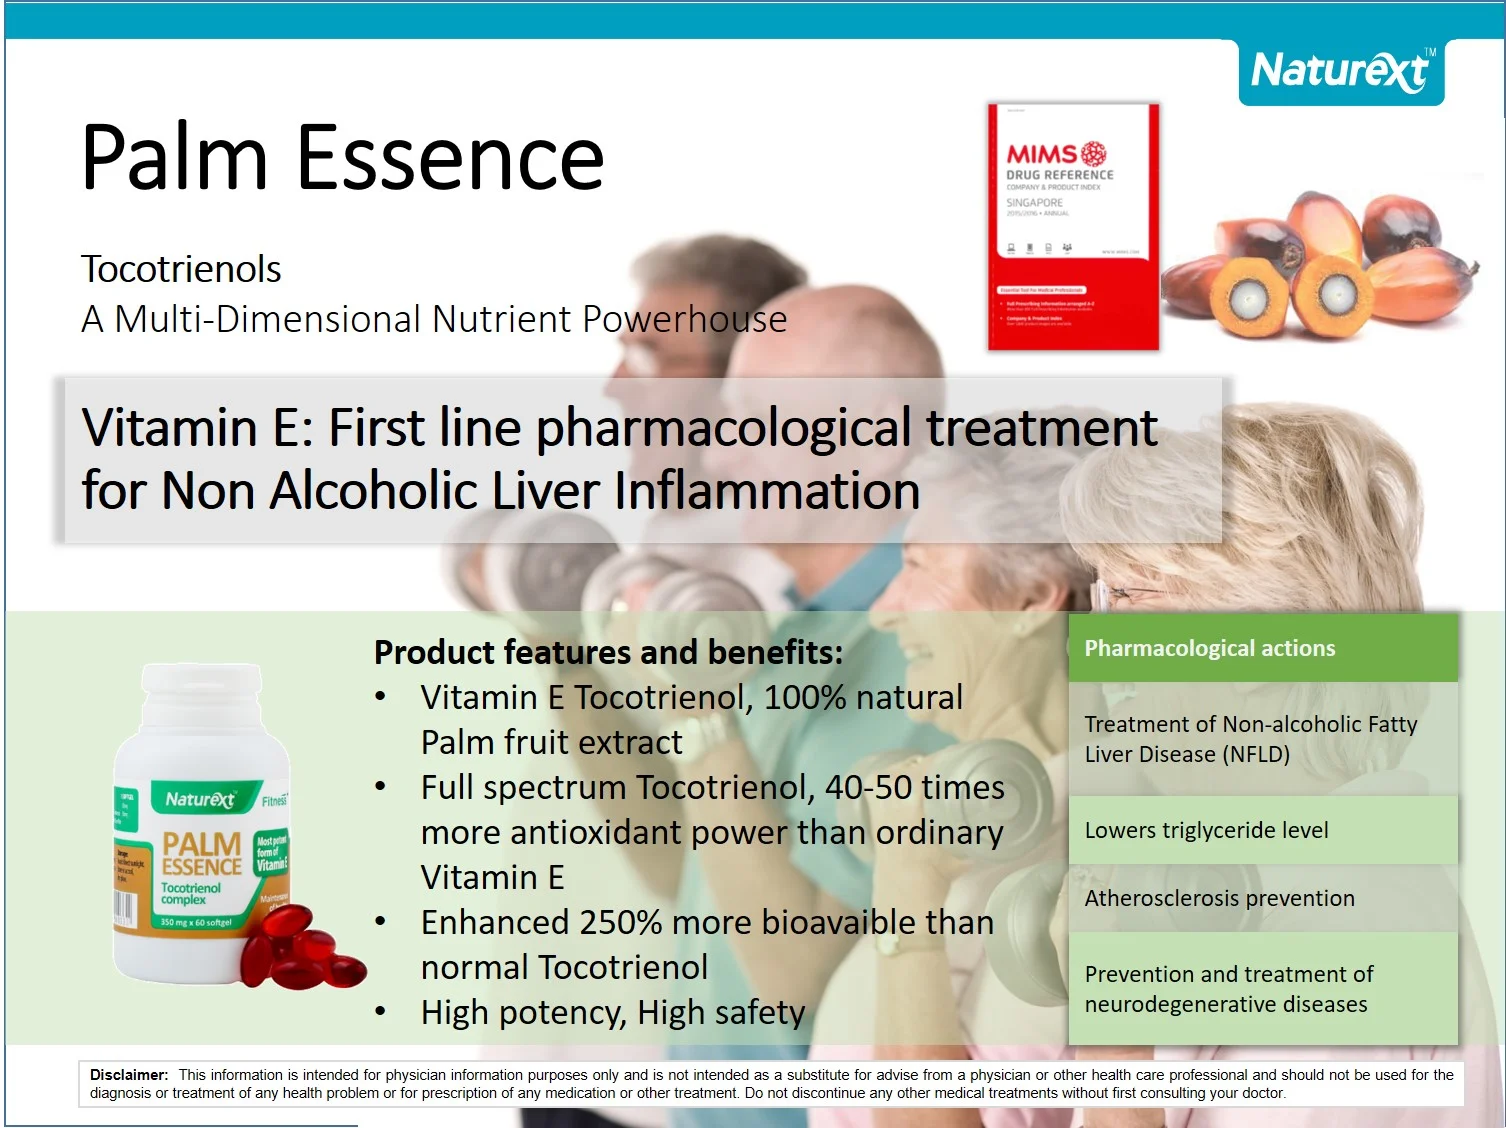 
Most Potent form of Vitamin E Palm Essence Made from Trocotrienols (T3) for Liver and Neurodegeneration 